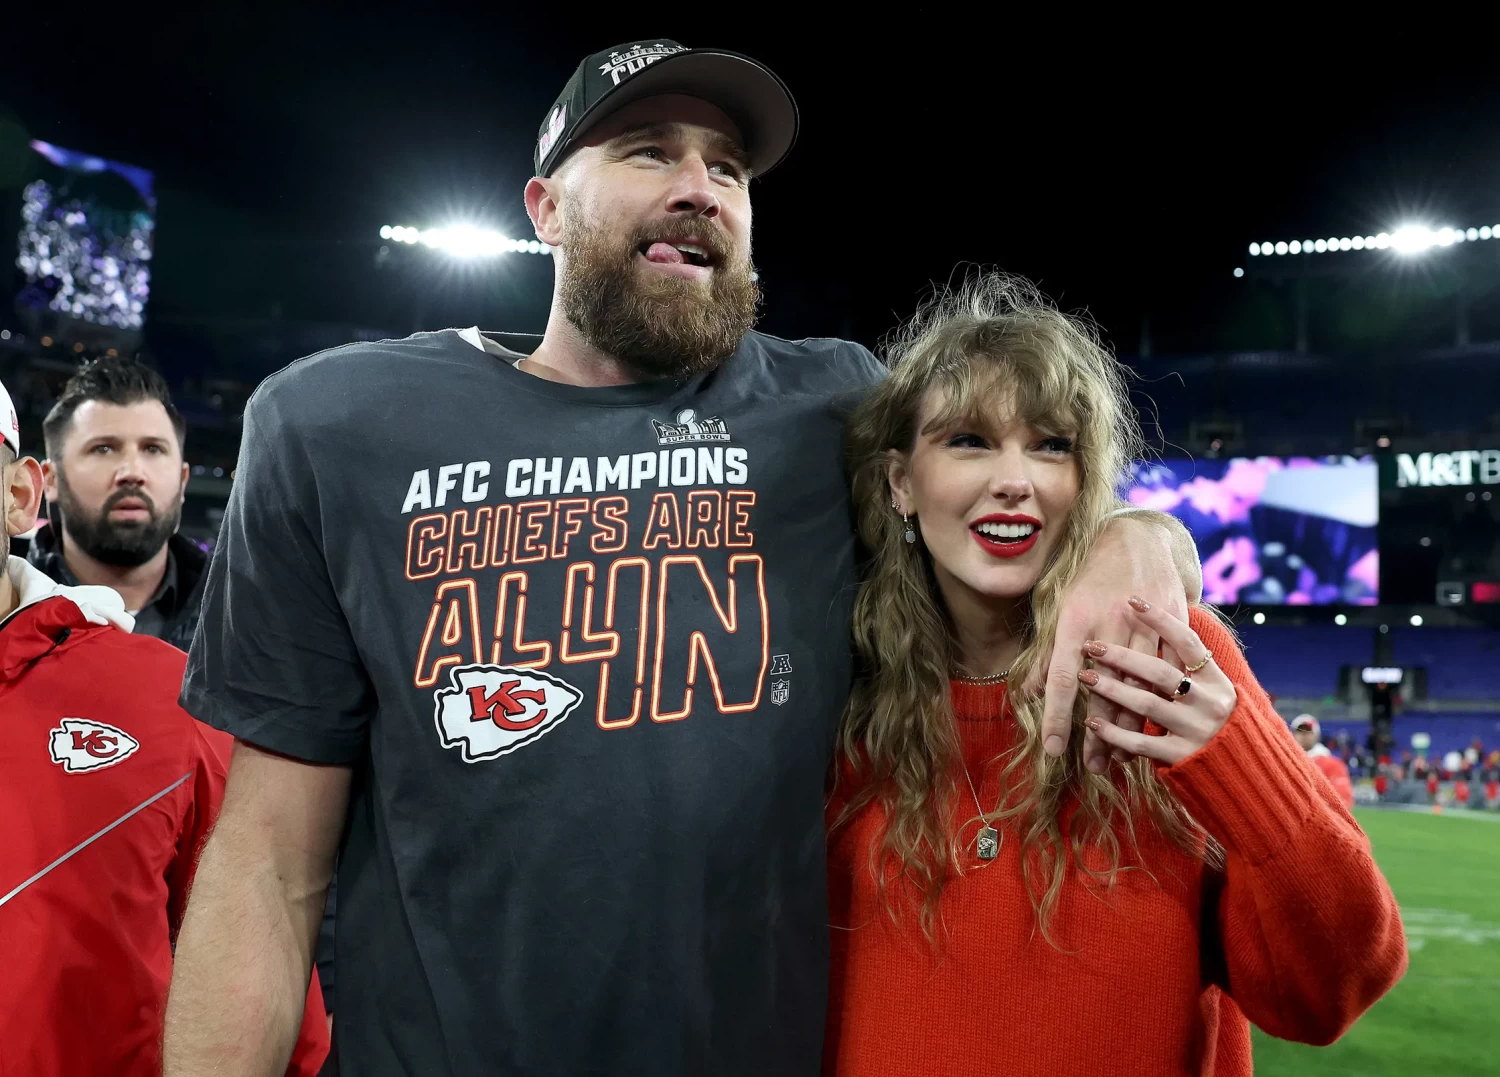 The Combination of Travis Kelce plus Taylor Swift creates an all-consuming content vortex. Photograph by Patrick Smith/Getty